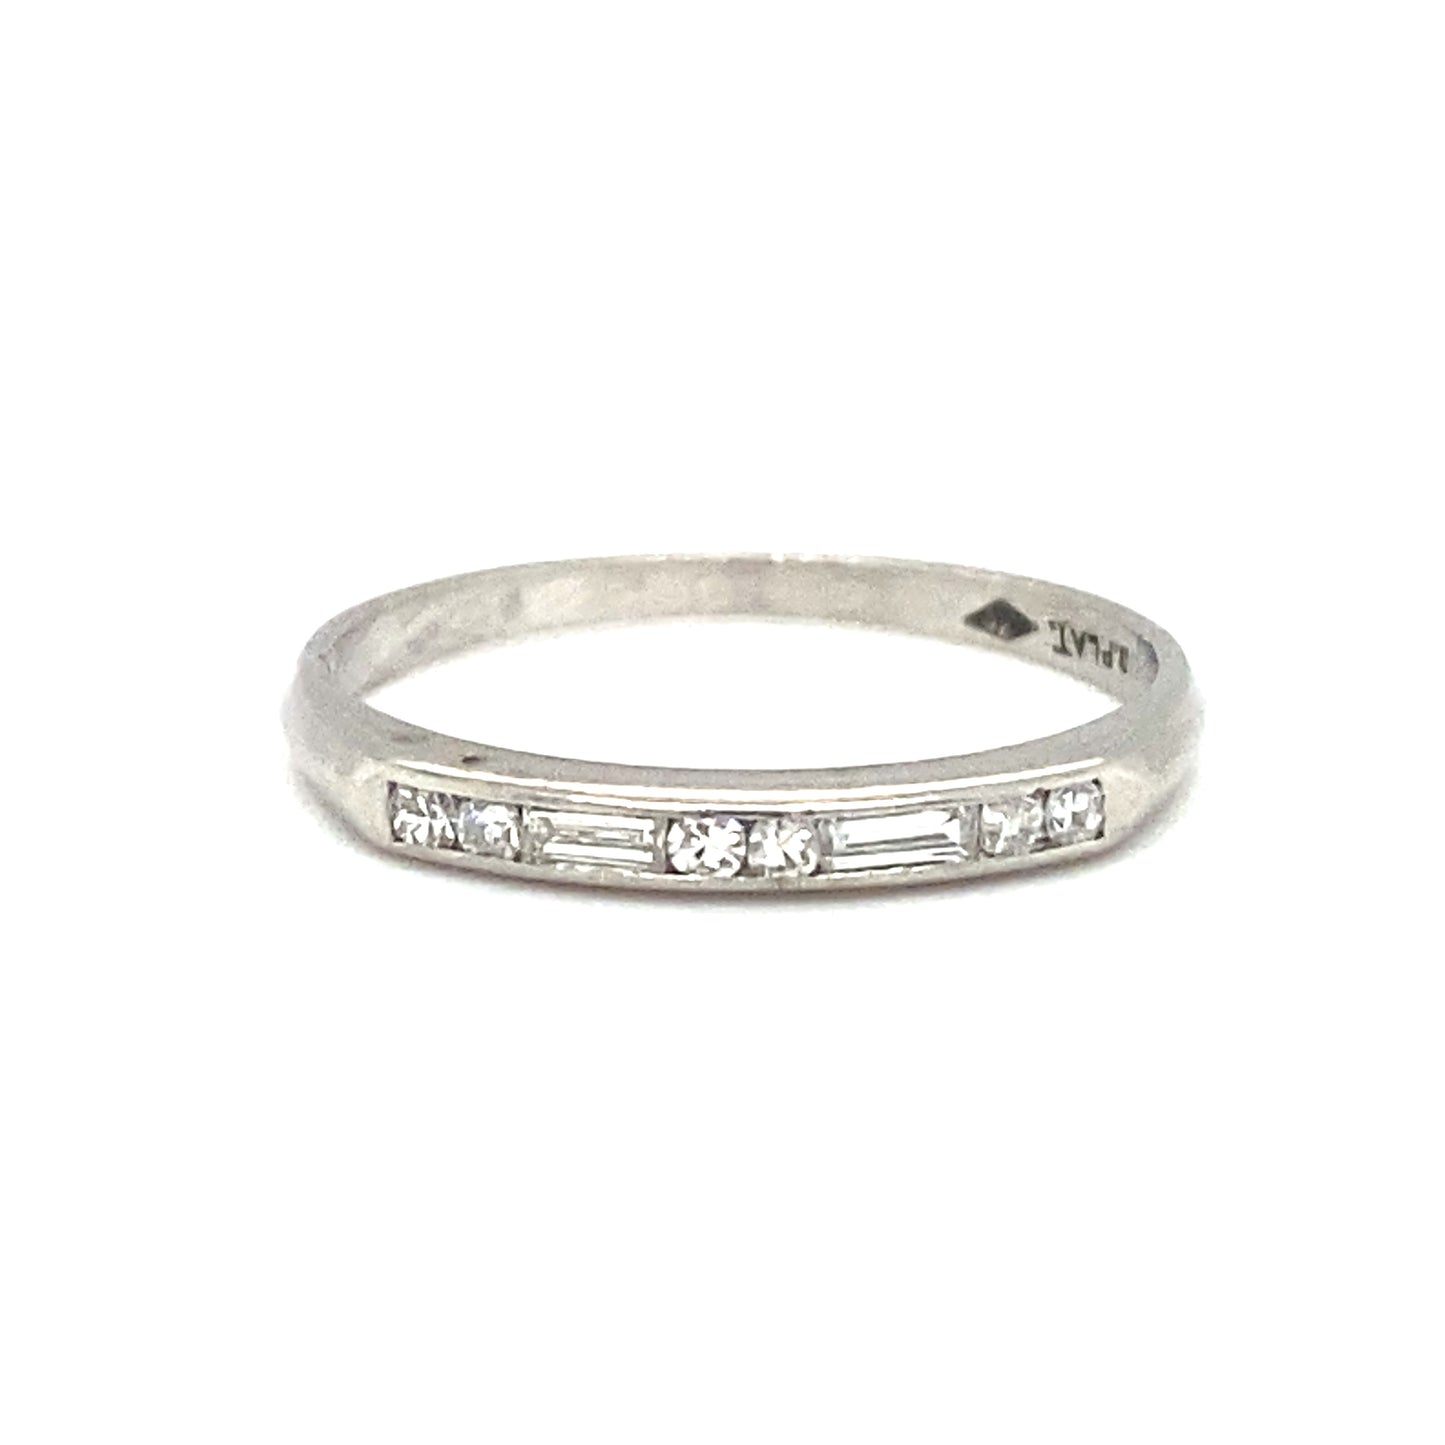 Circa 1930s Diamond Anniversary Band in Platinum with Date Engraving